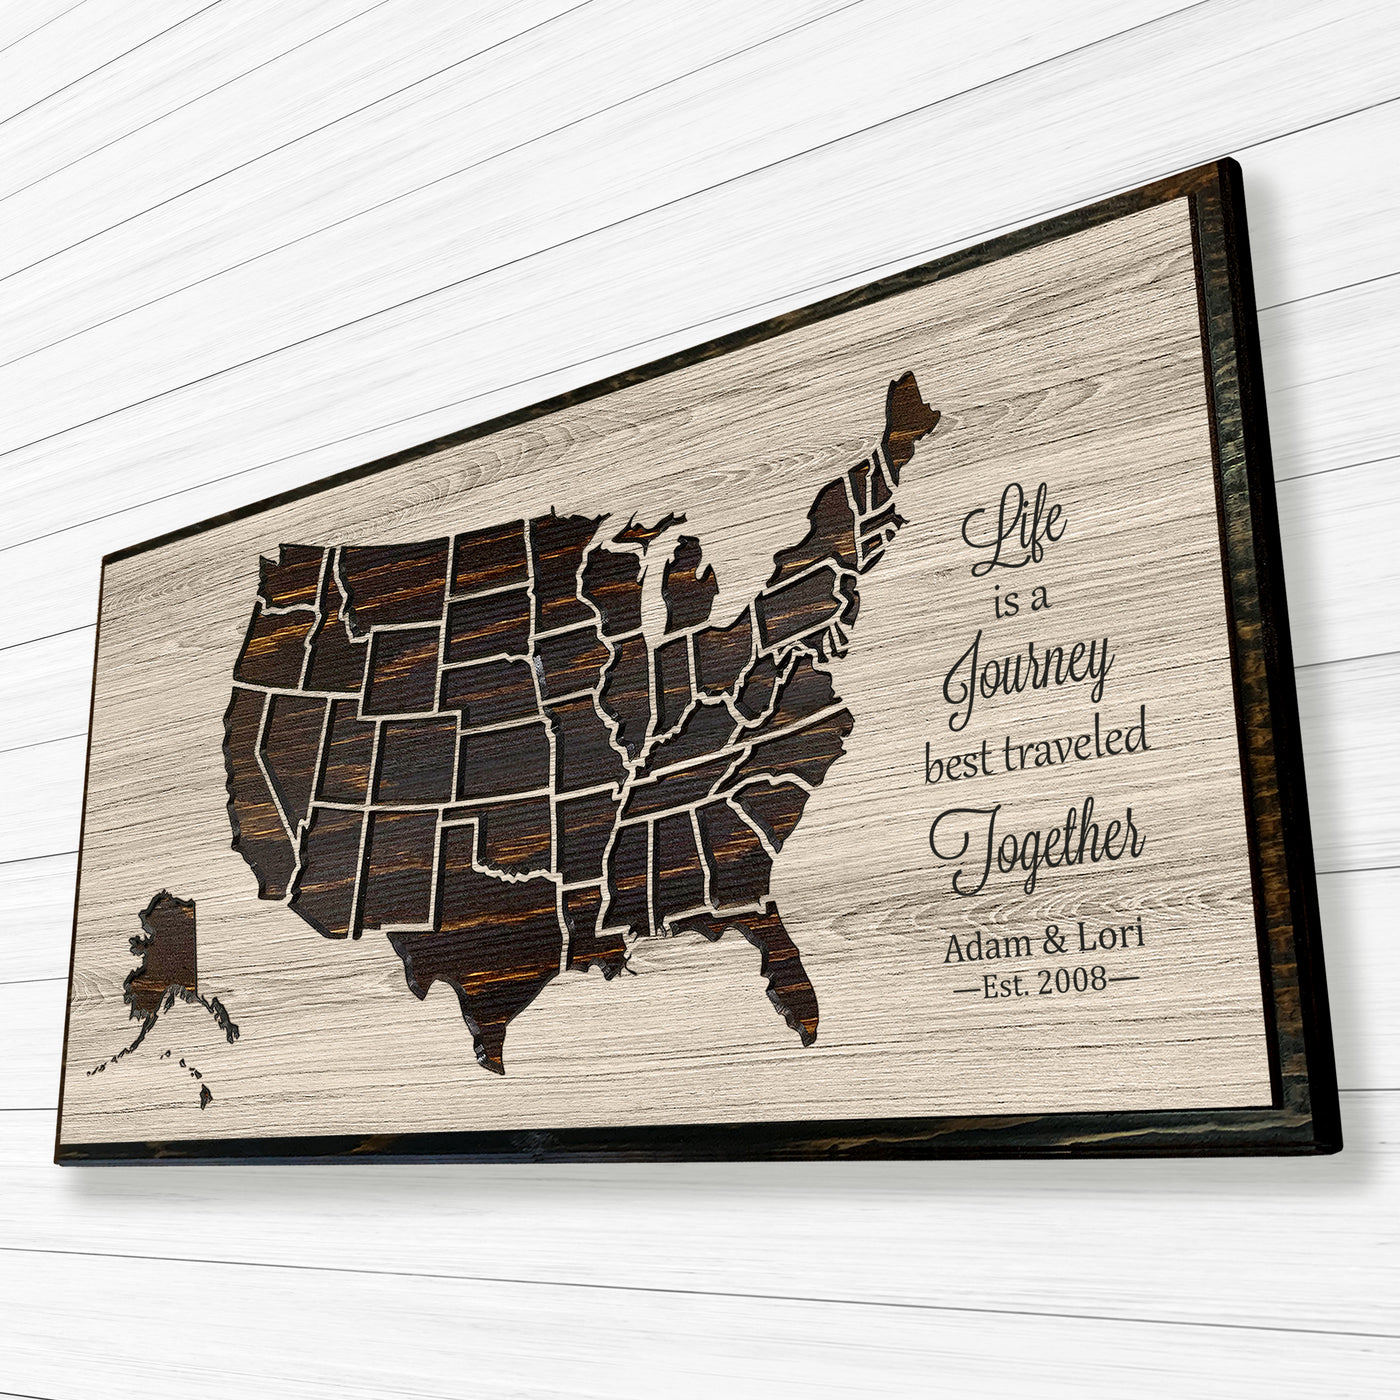 custom wooden push pin map - us map wood wall art that can be customized with your own text and mark locations with our unique push pins - excellent wedding anniversary gift idea